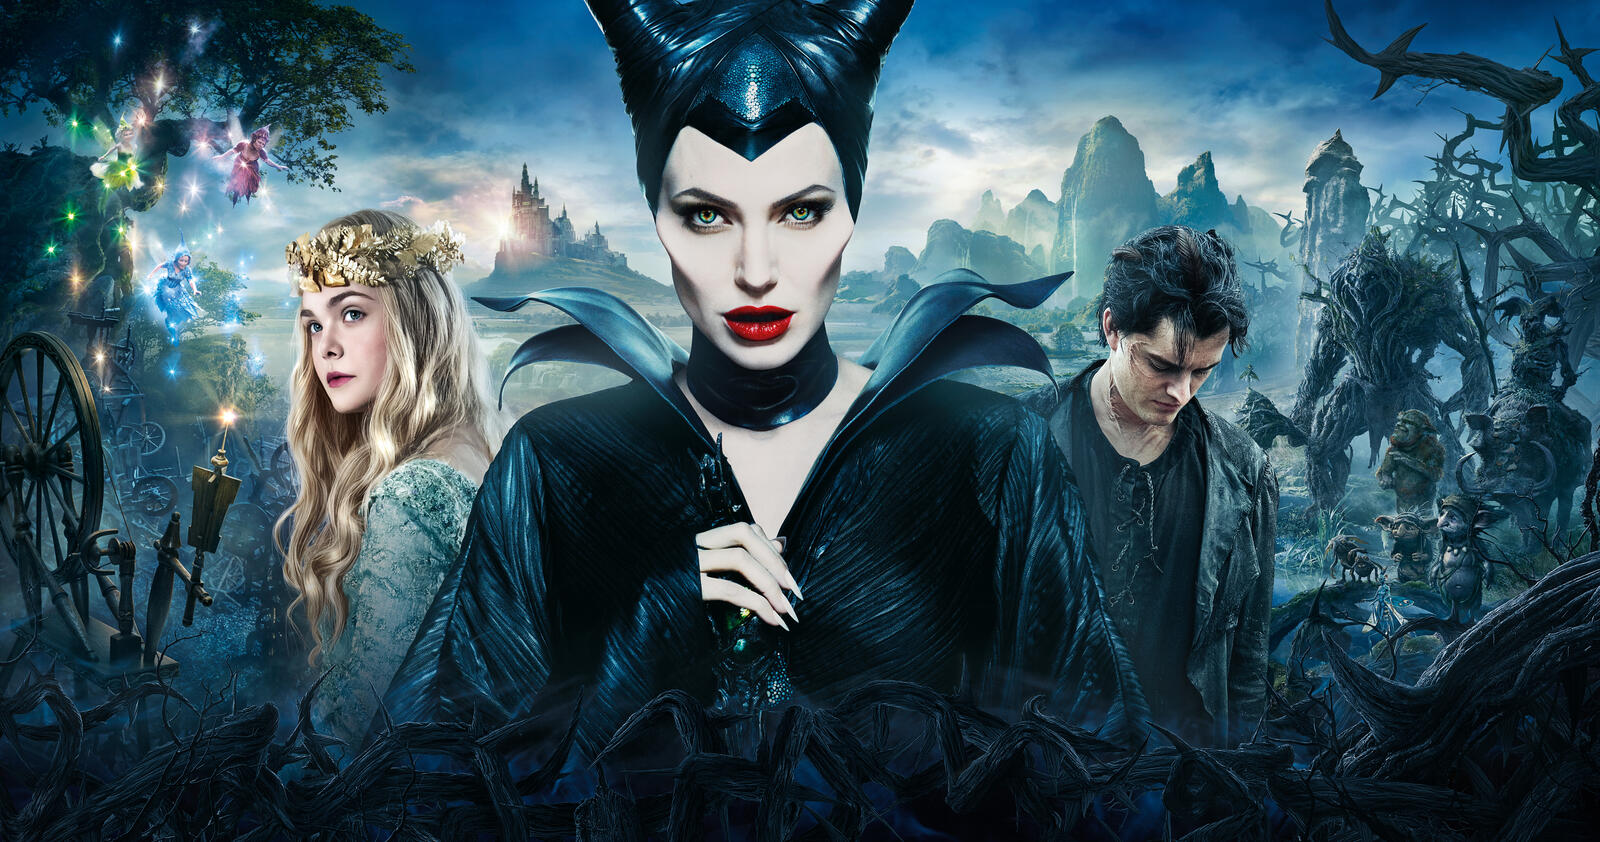 Wallpapers The movie Maleficent: mistress of the dark fantasy adventure on the desktop